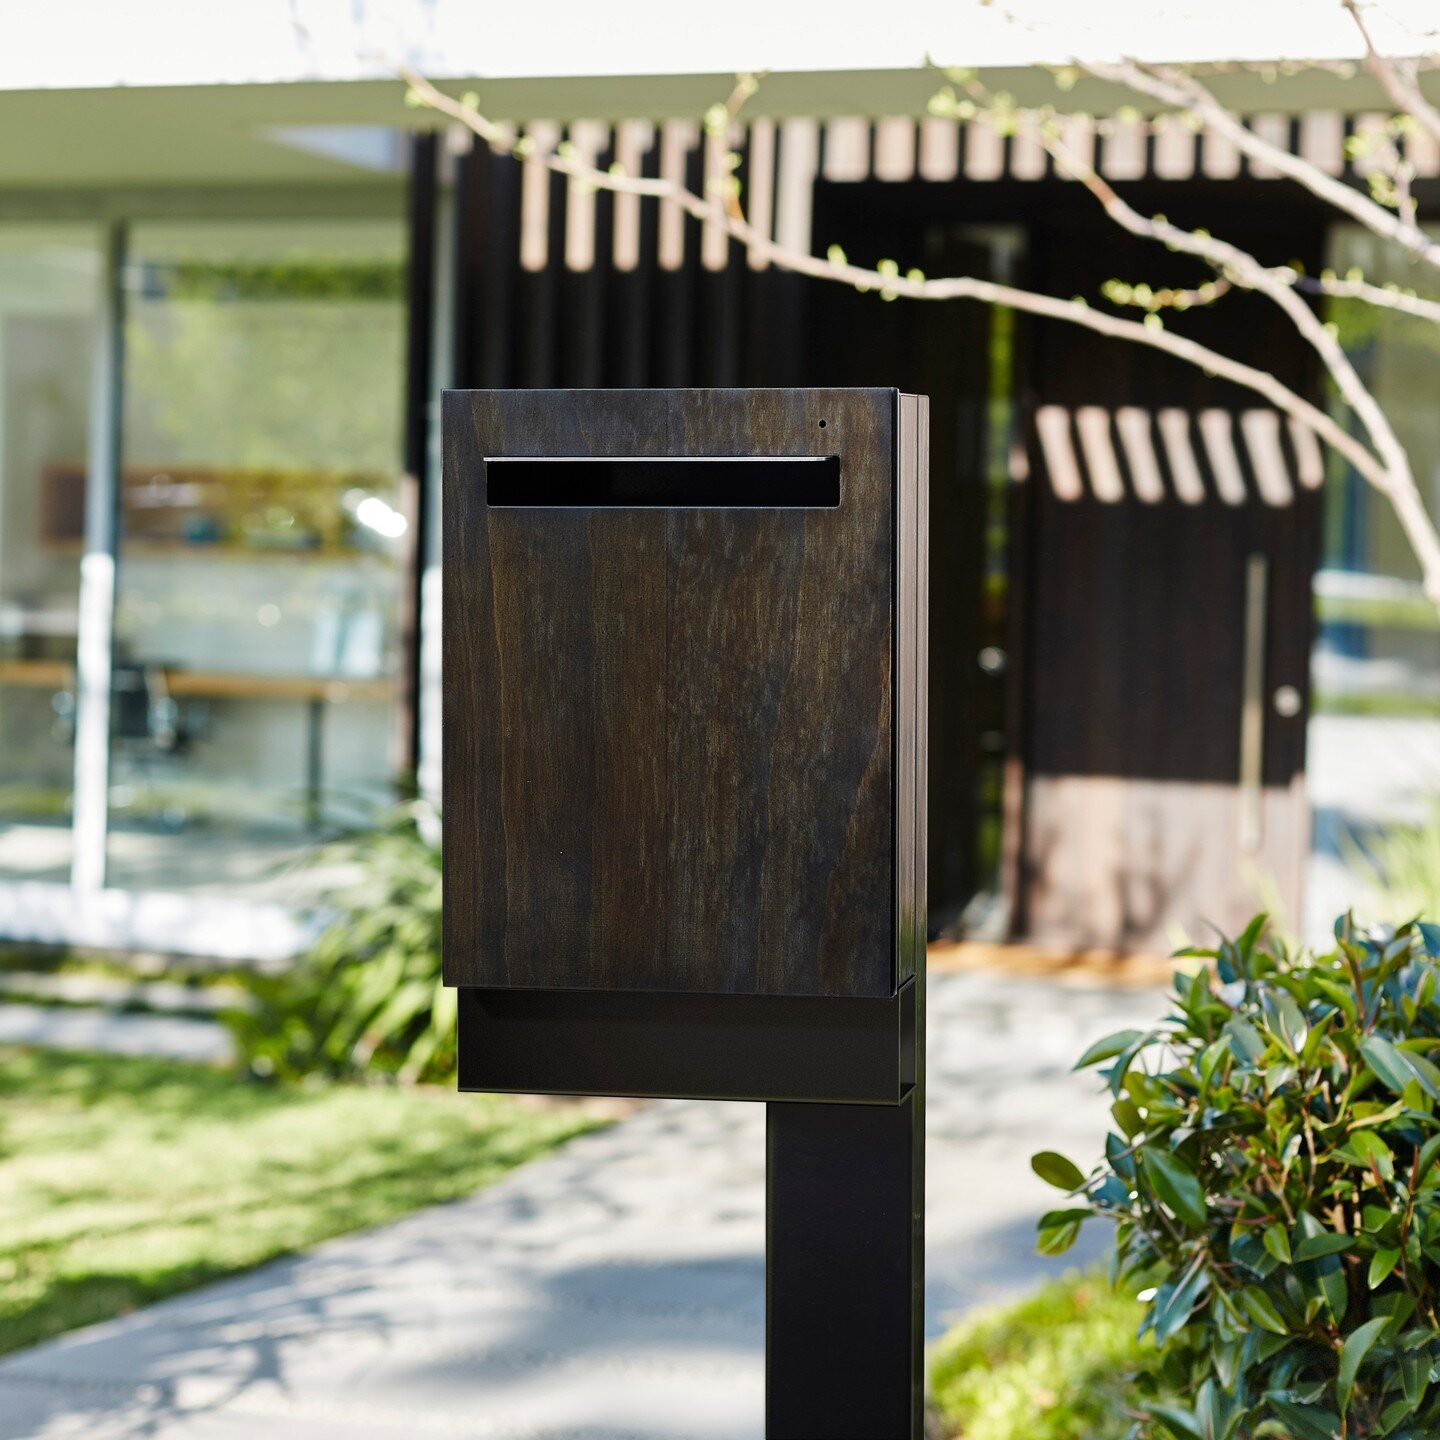 The Javi Letterbox can be tailored to suit its surrounding environment.⠀⁠
.⠀⁠
Customise to your liking and make it forever unique.⠀⁠
.⠀⁠
.⠀⁠
.⠀⁠
#javidesign #design #letterbox #mailbox #productdesign #minimal #minimalist #home #newhome #homeimproveme